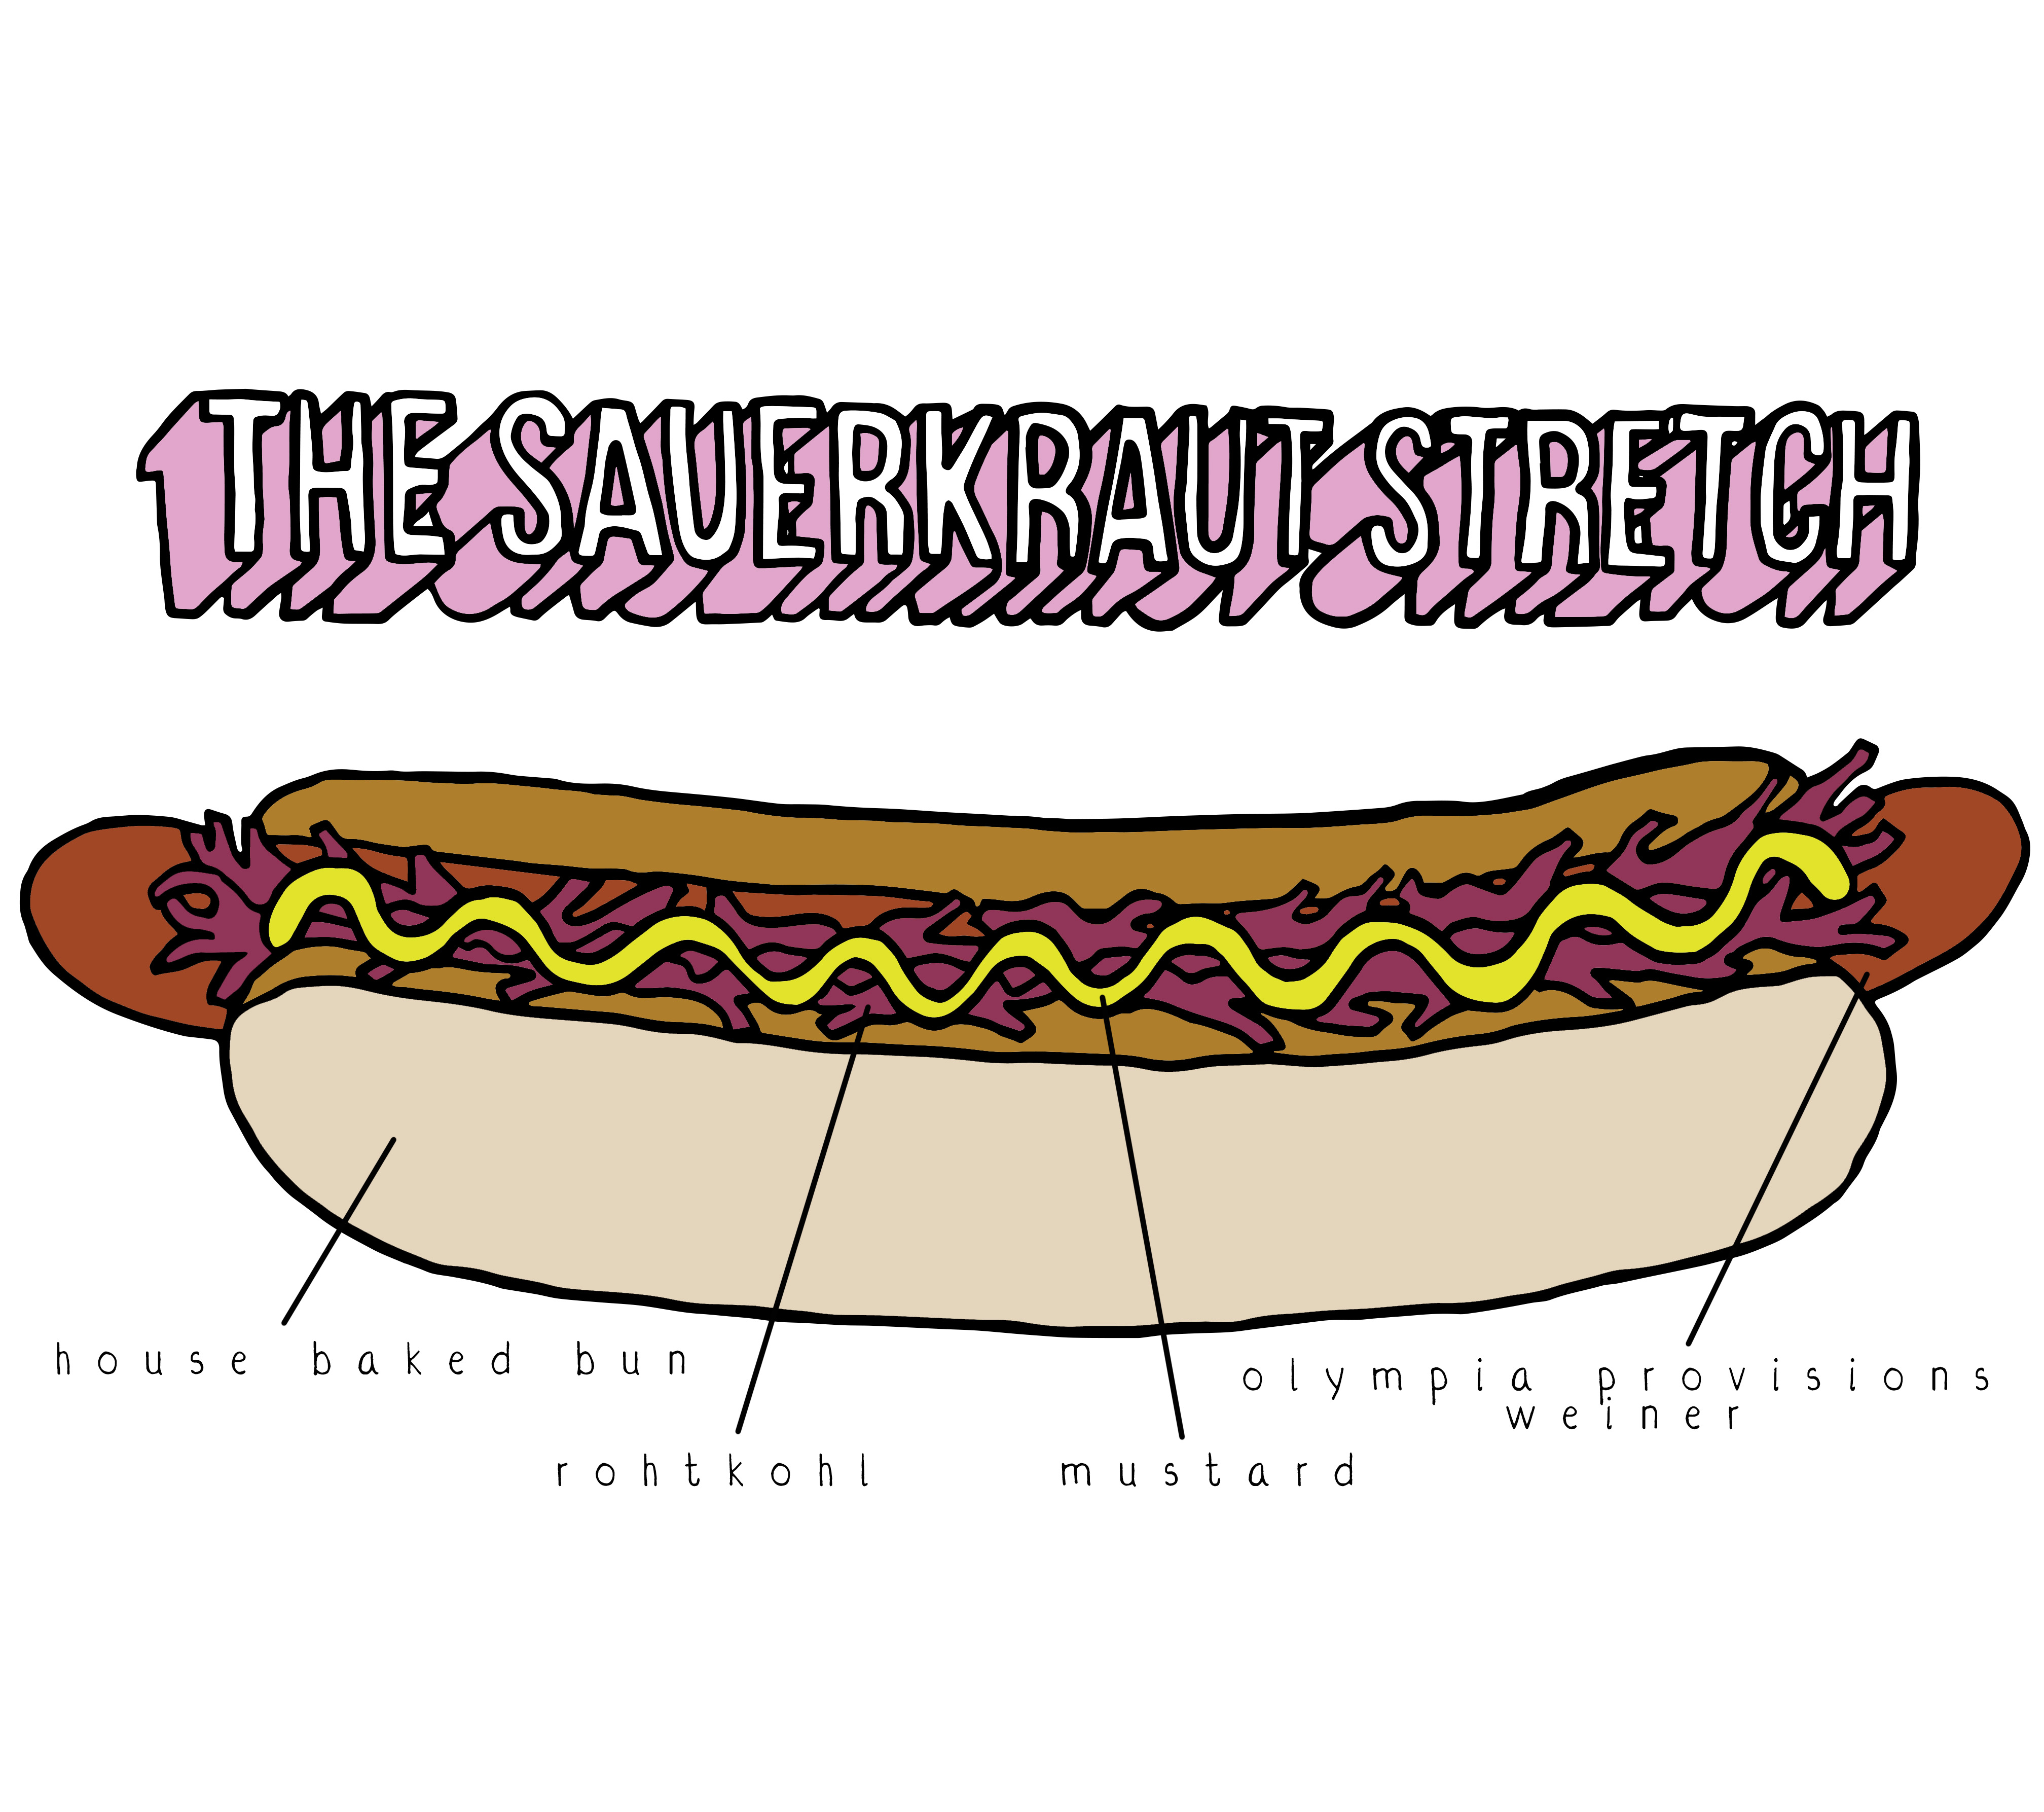 An illustration of a hot dog in a hot dog bun, with words pointing to different elements like the bun, the Olympia Provisions weiner, and the mustard.